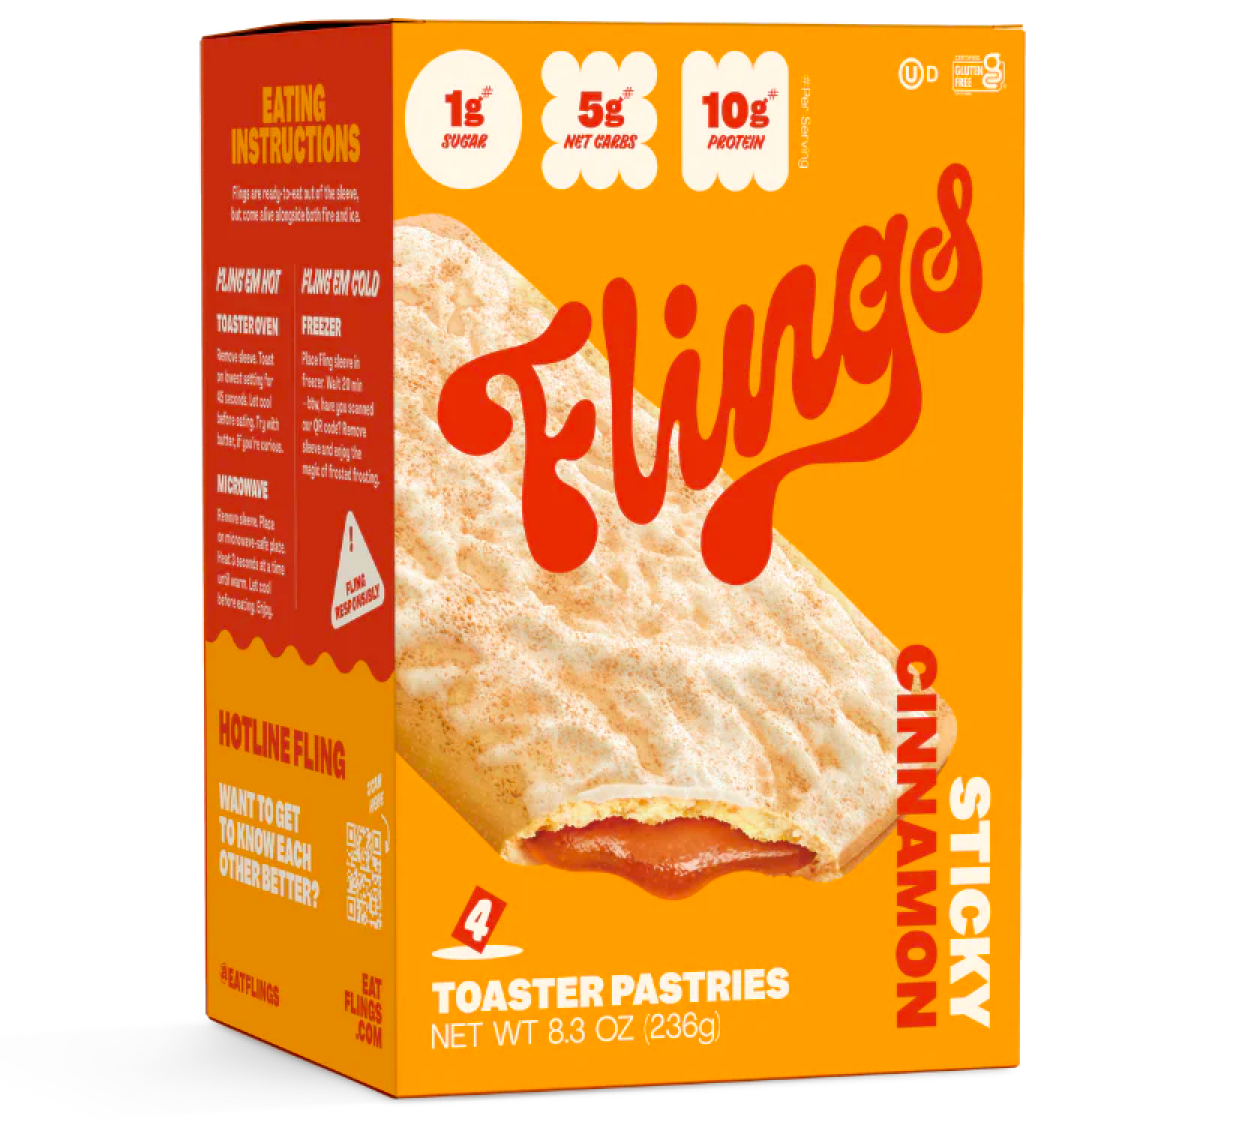 FREE Box of Flings Sticky Cinnamon Toaster Pastries at Target